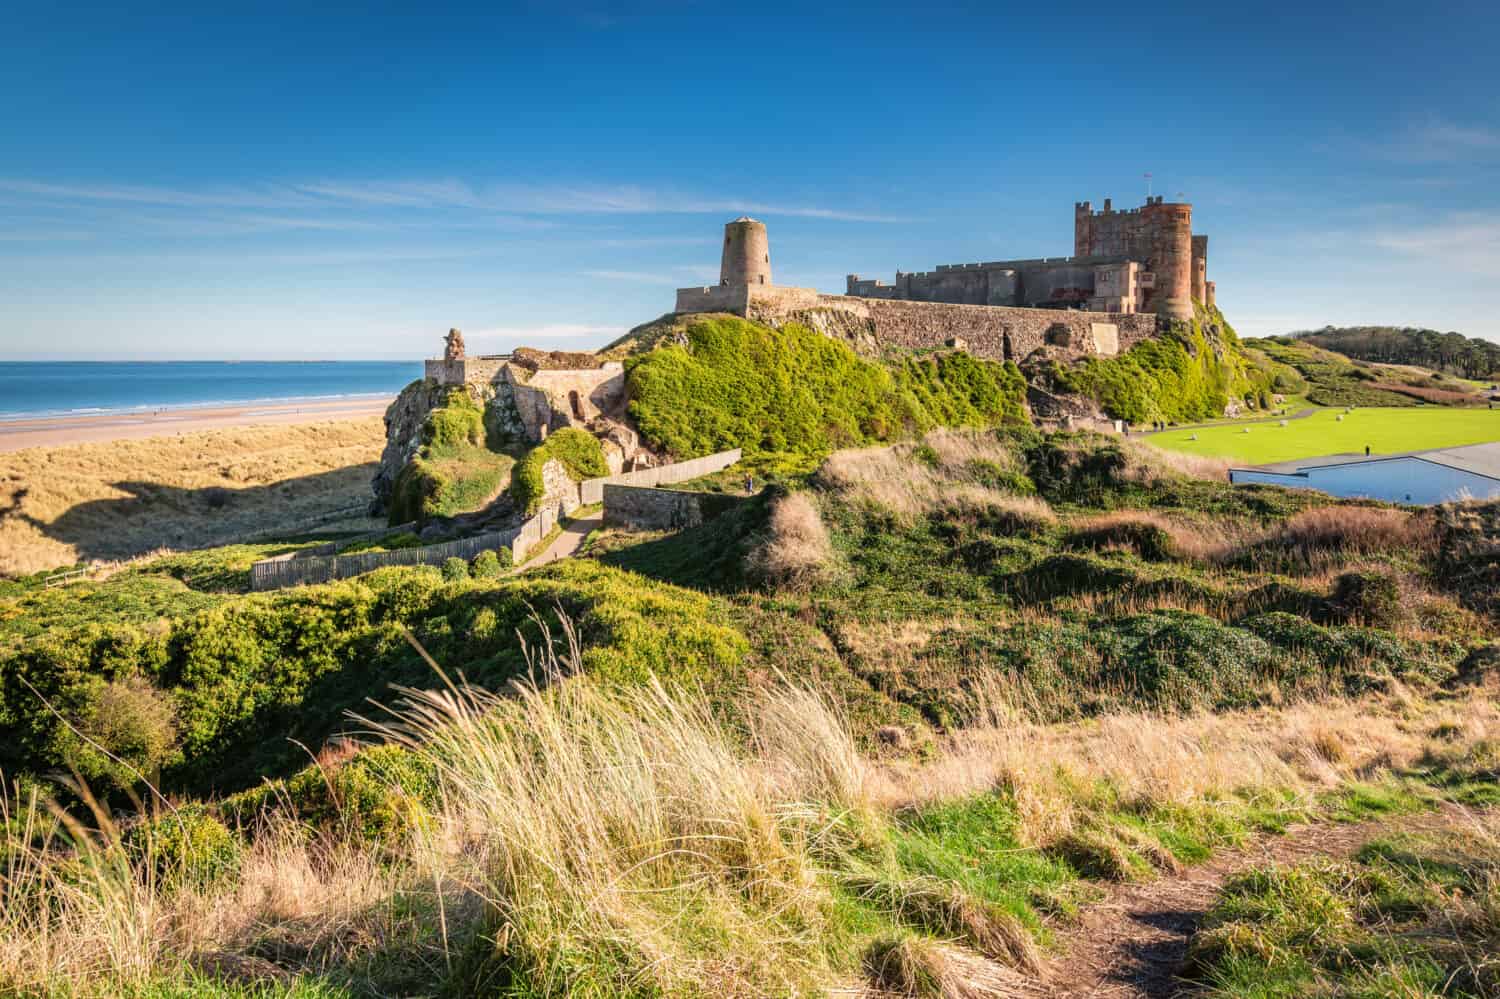 Elevated View of Bamburgh Castle / Bamburgh Castle viewed from an elevated hillock, on the Northumberland coastline